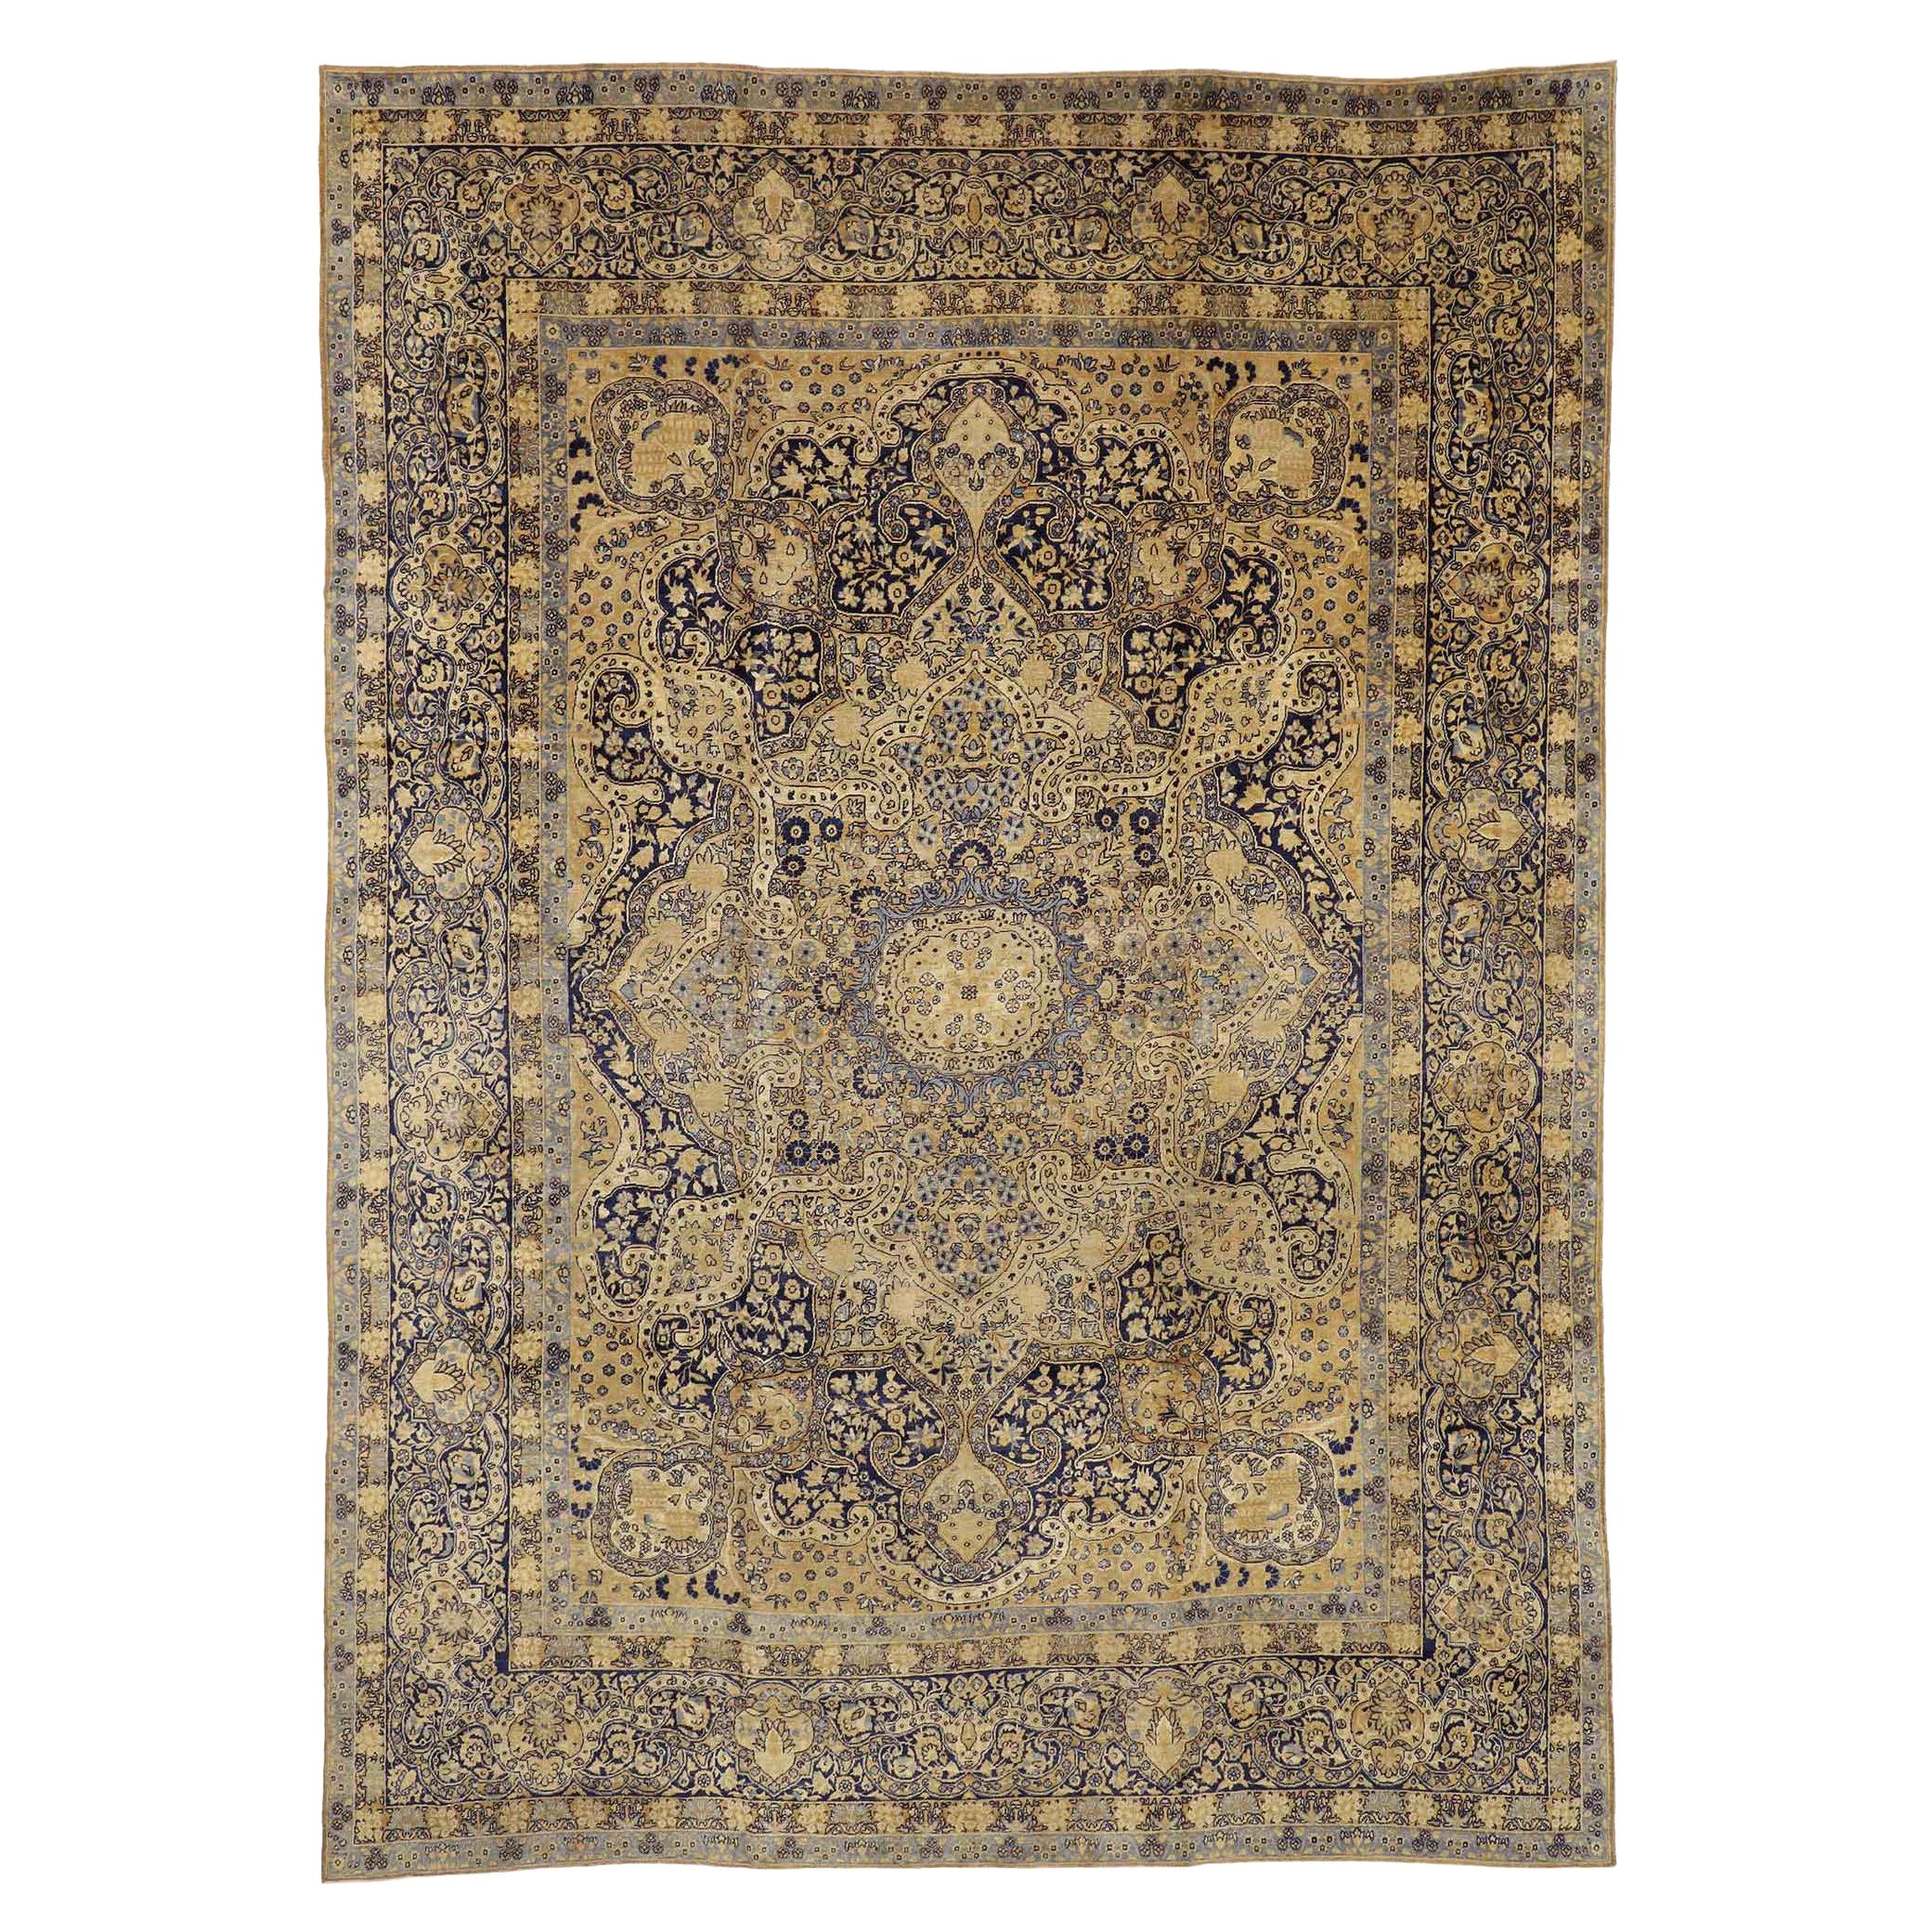 Antique Persian Yazd Rug, Timeless Elegance Meets Welcomed Informality